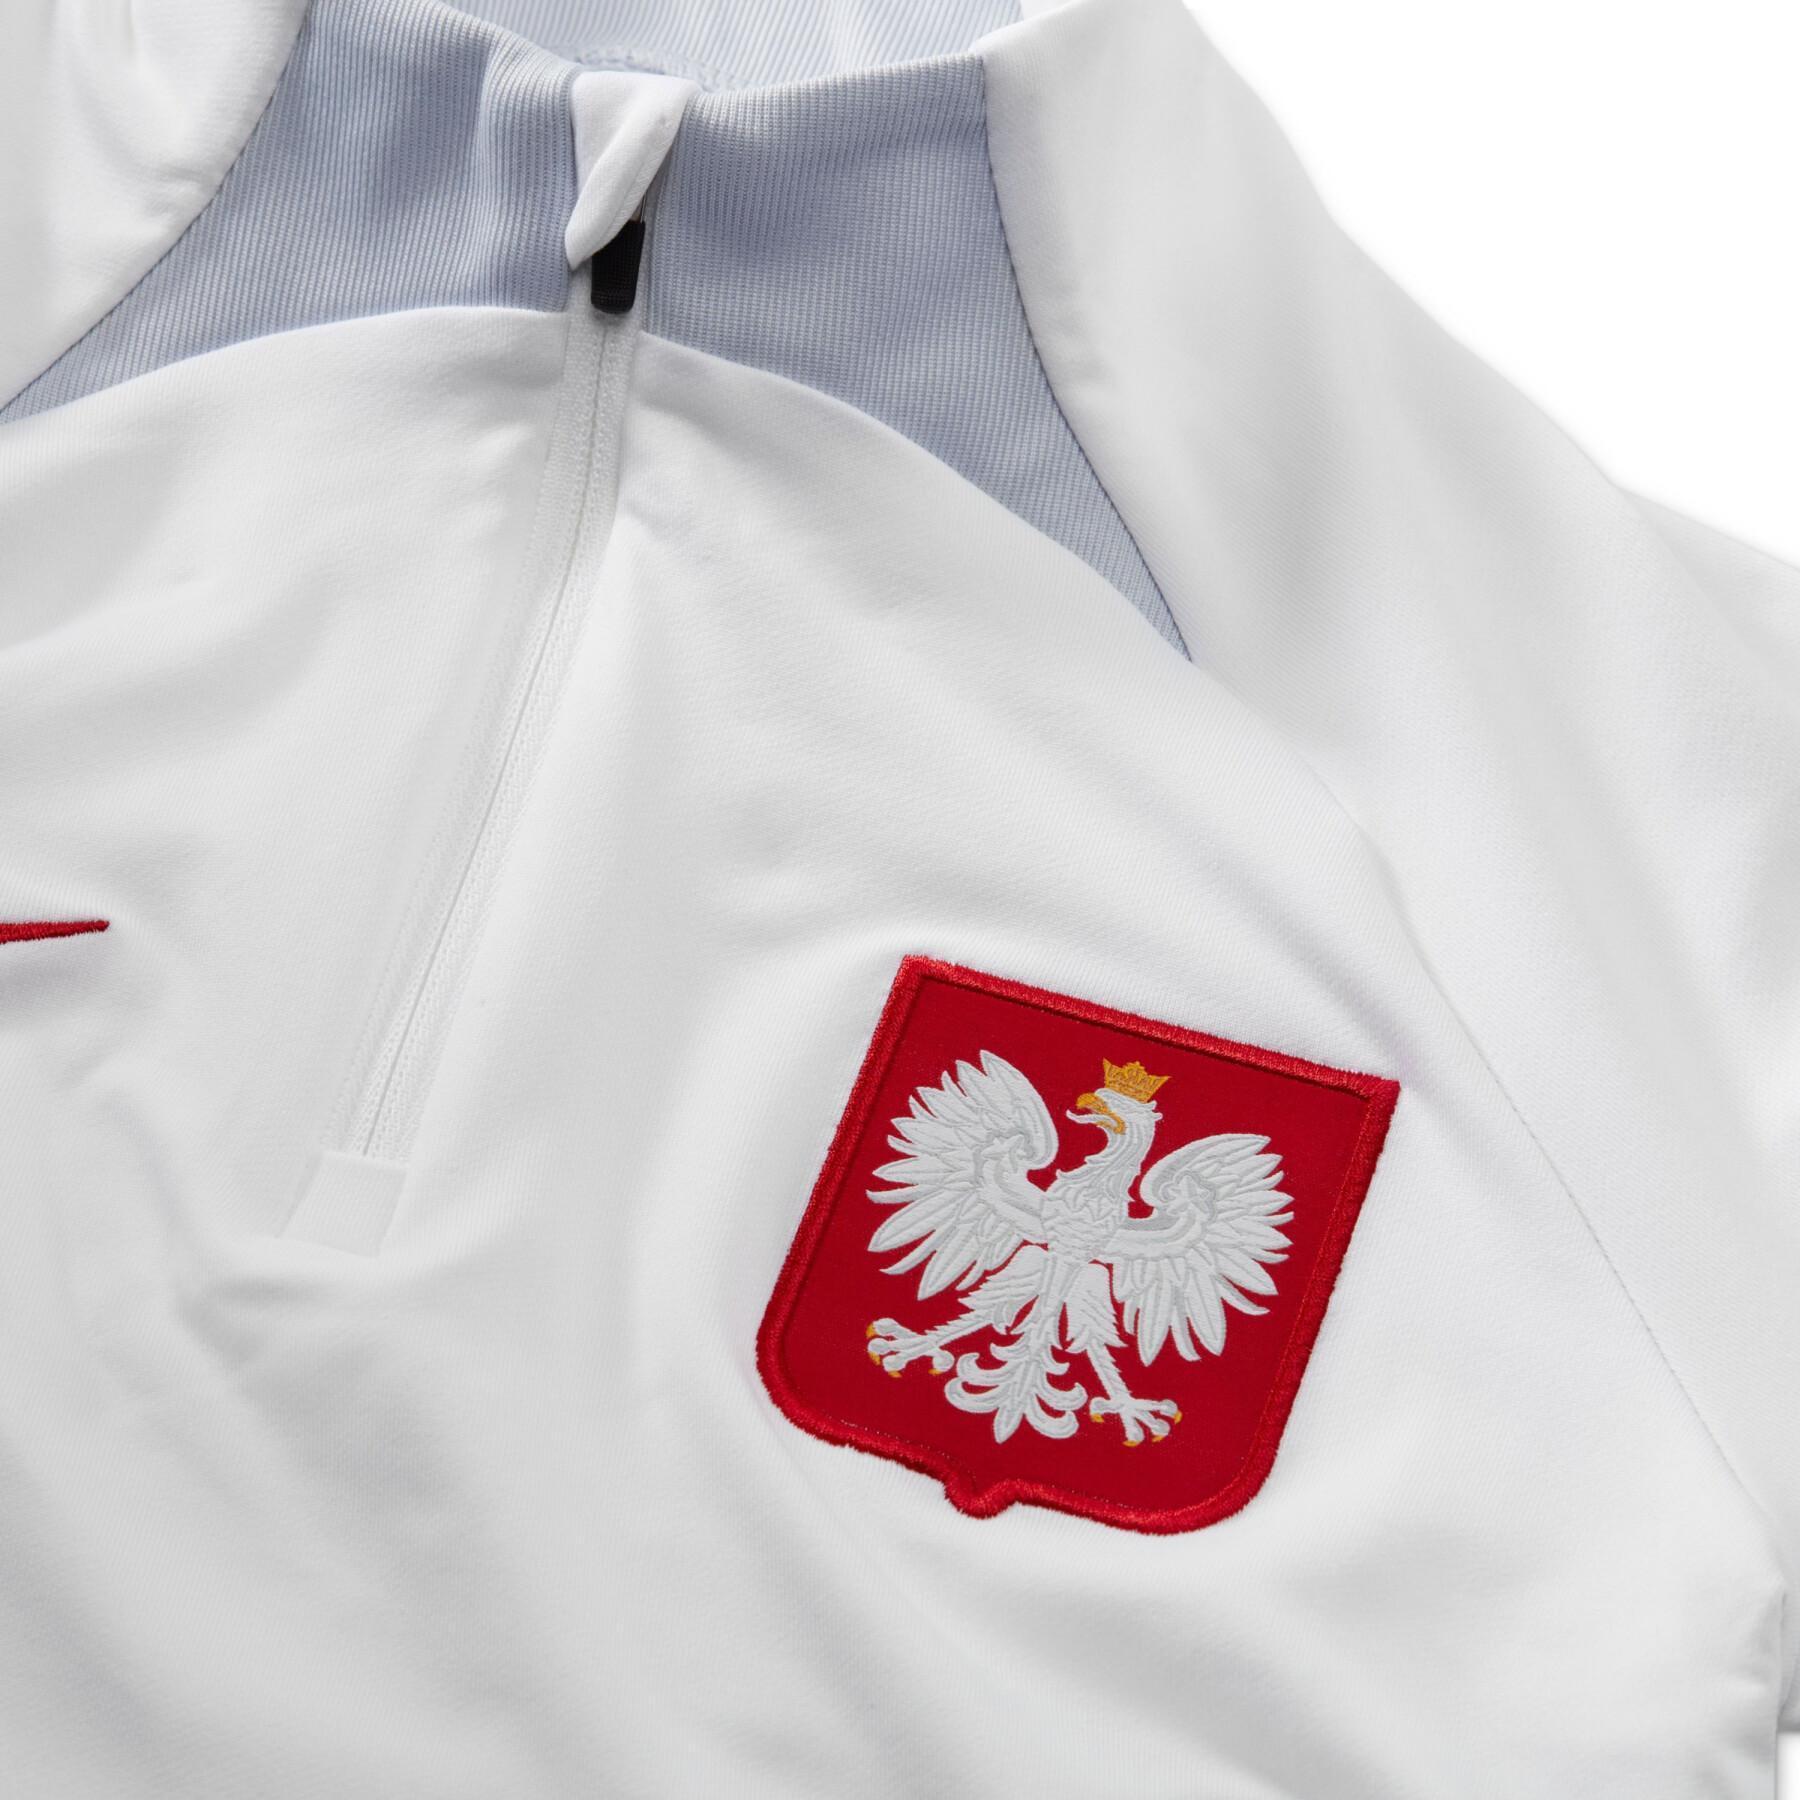 Children's World Cup 2022 training jersey Pologne